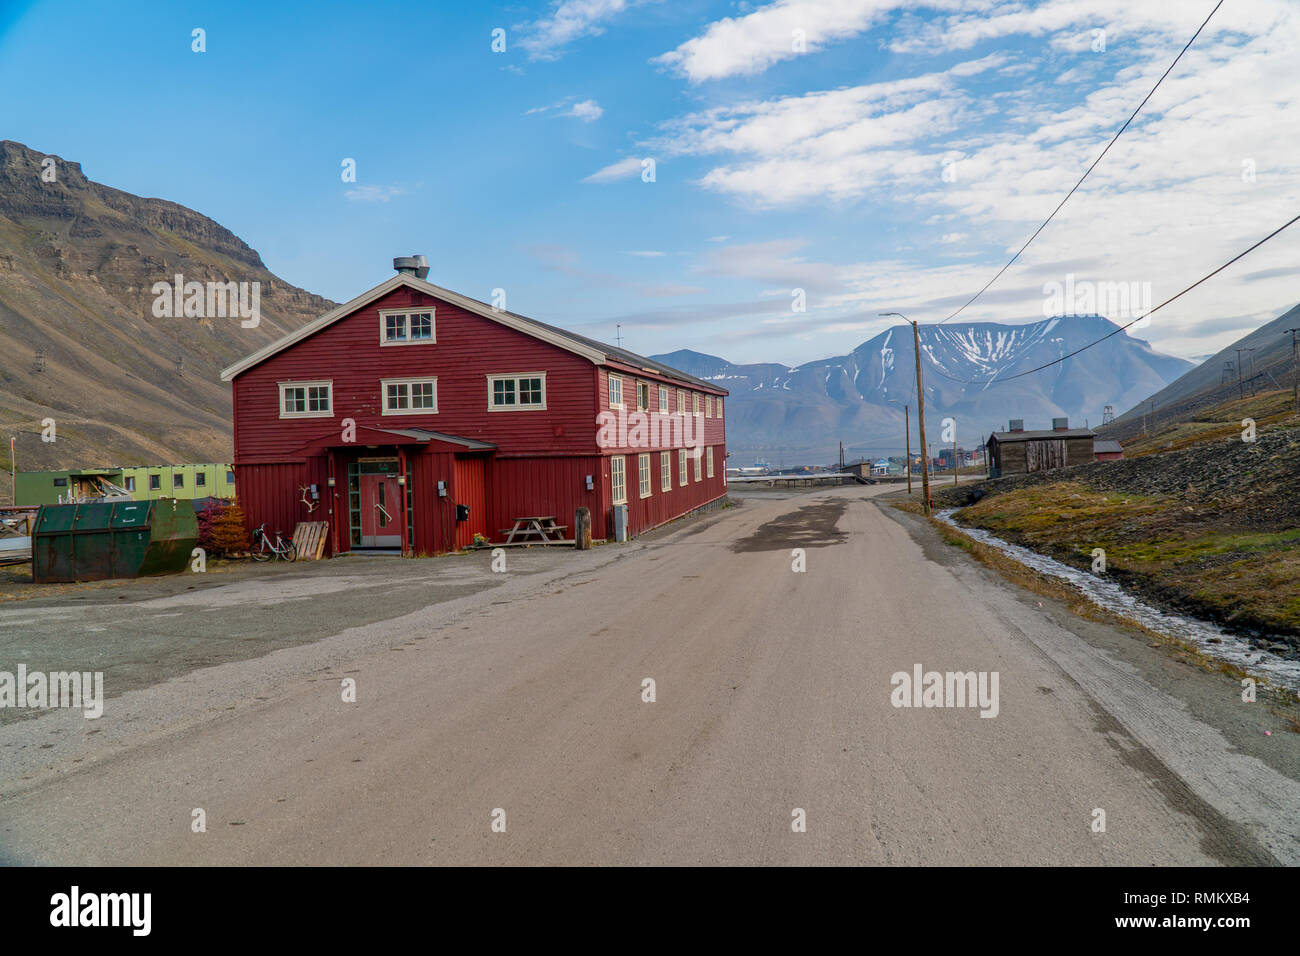 Longyearbyen (literally The Longyear Town) is the largest settlement and the administrative centre of Svalbard, Norway. Longyearbyen is located in the Stock Photo